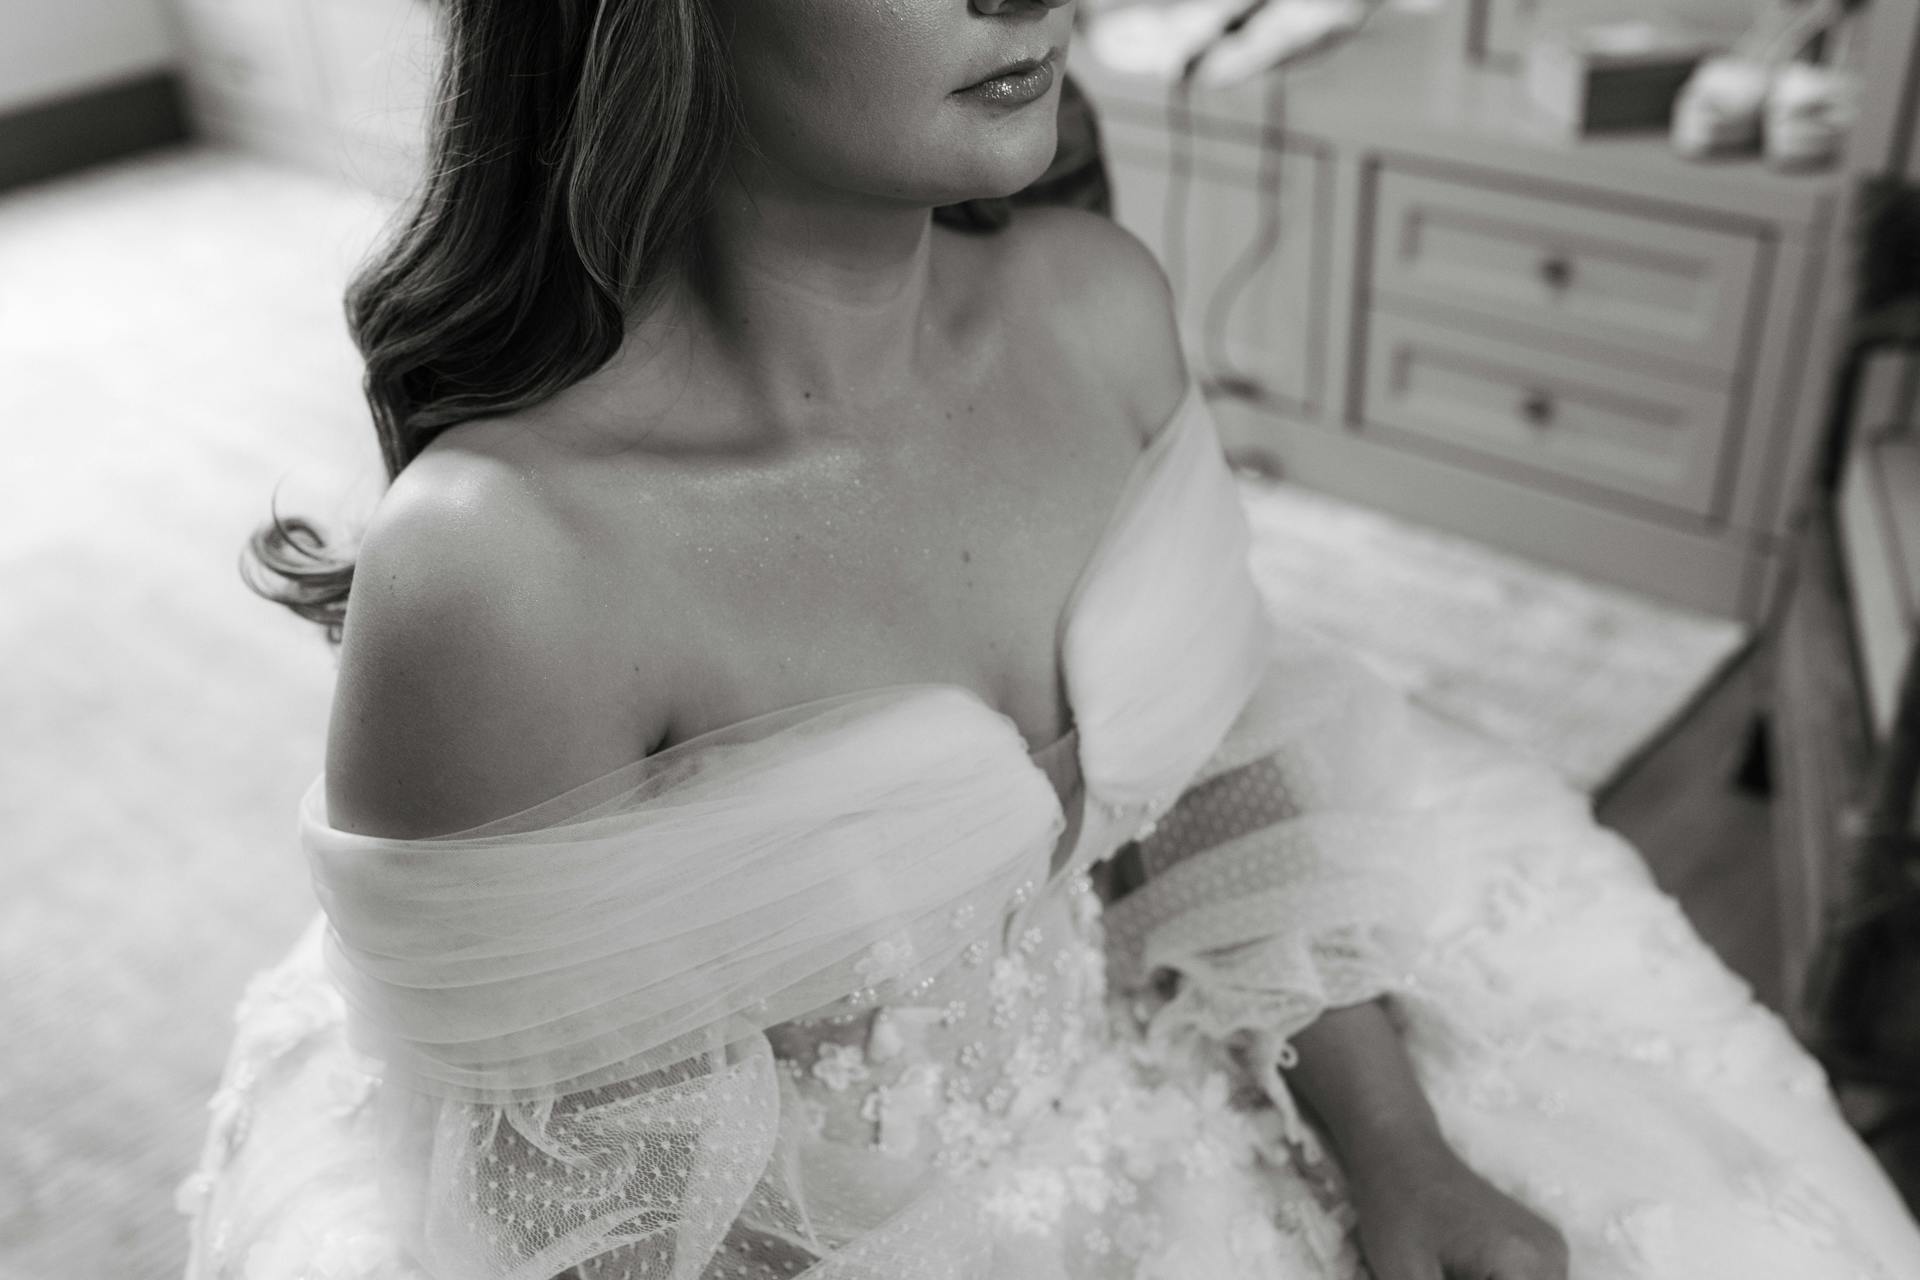 A bride sitting in a room | Source: Pexels